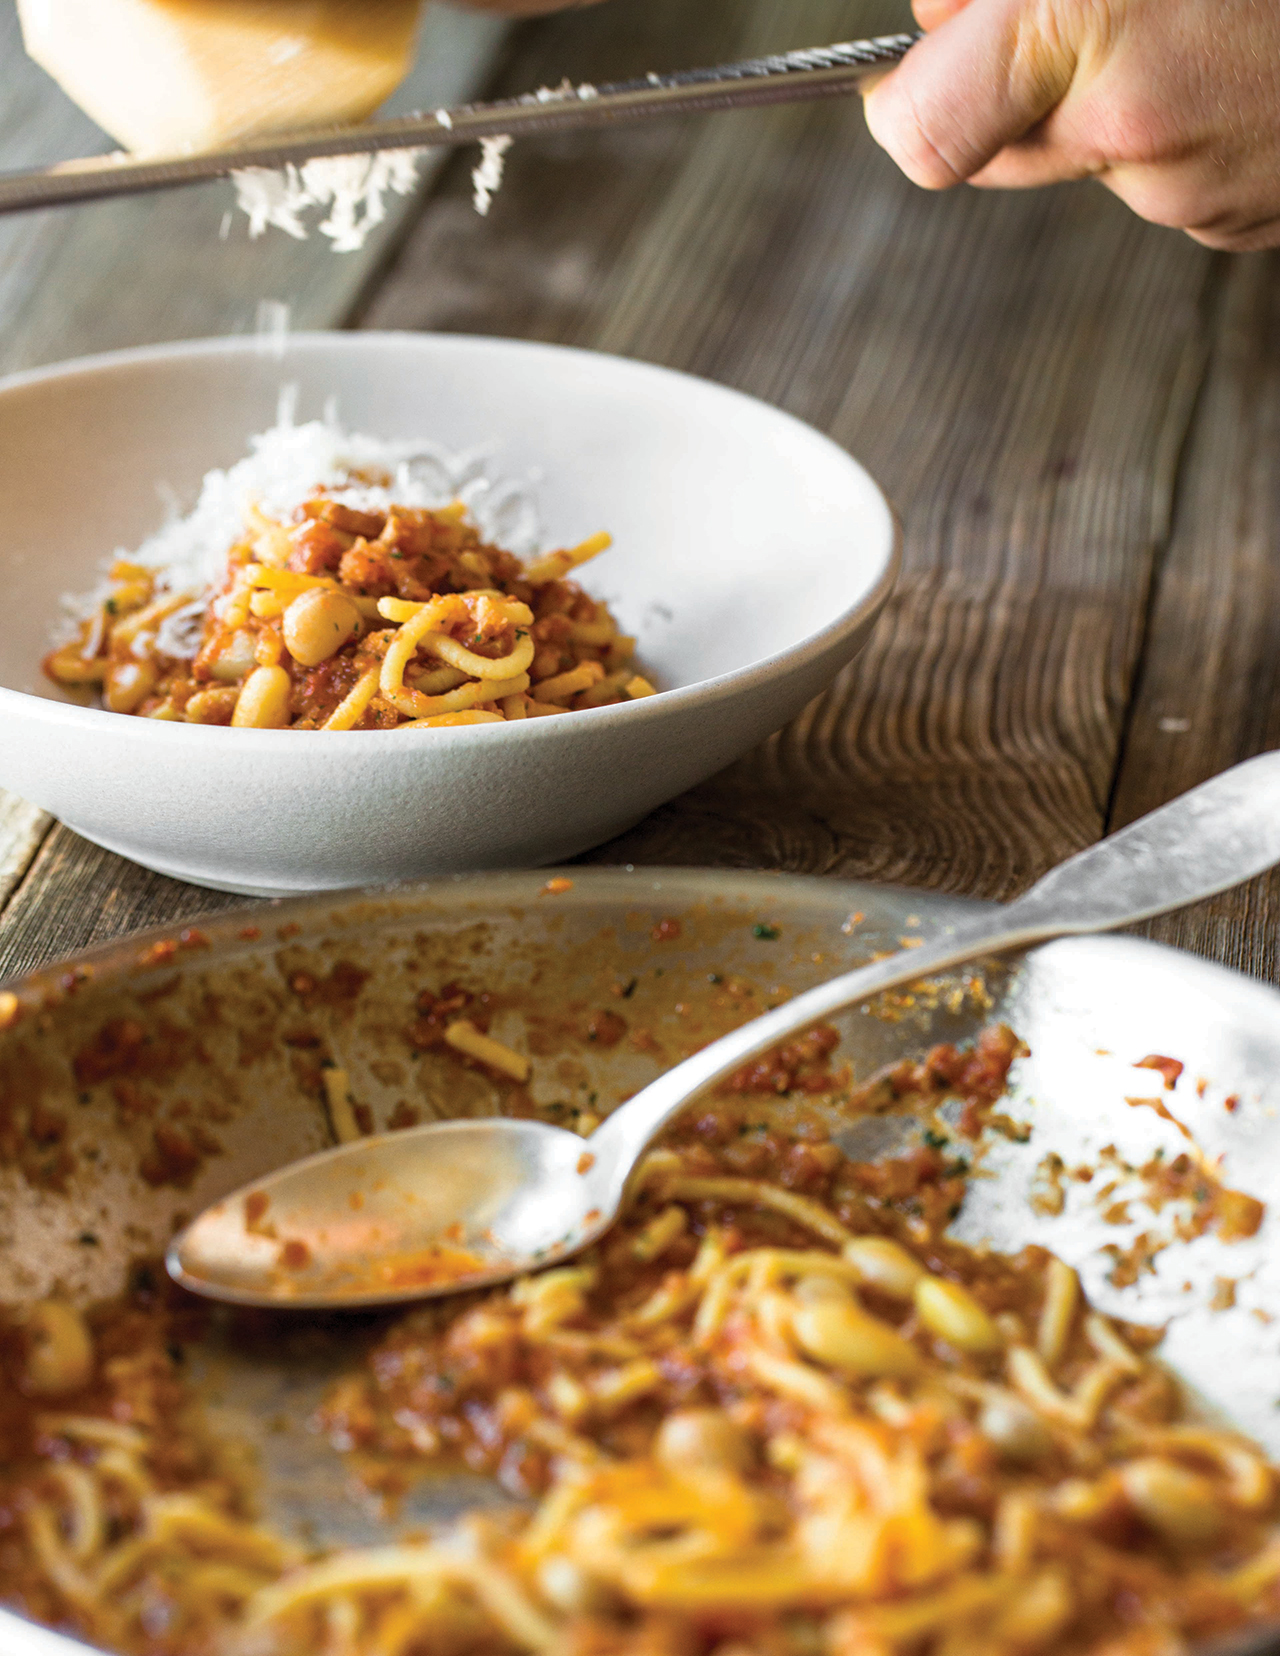 Pasta with tomato sauce enriched with pork and beans, from chef Thomas McNaughton's new cookbook &quot;Flour and Water: Pasta&quot; Image: © 2014 by Eric Wolfinger